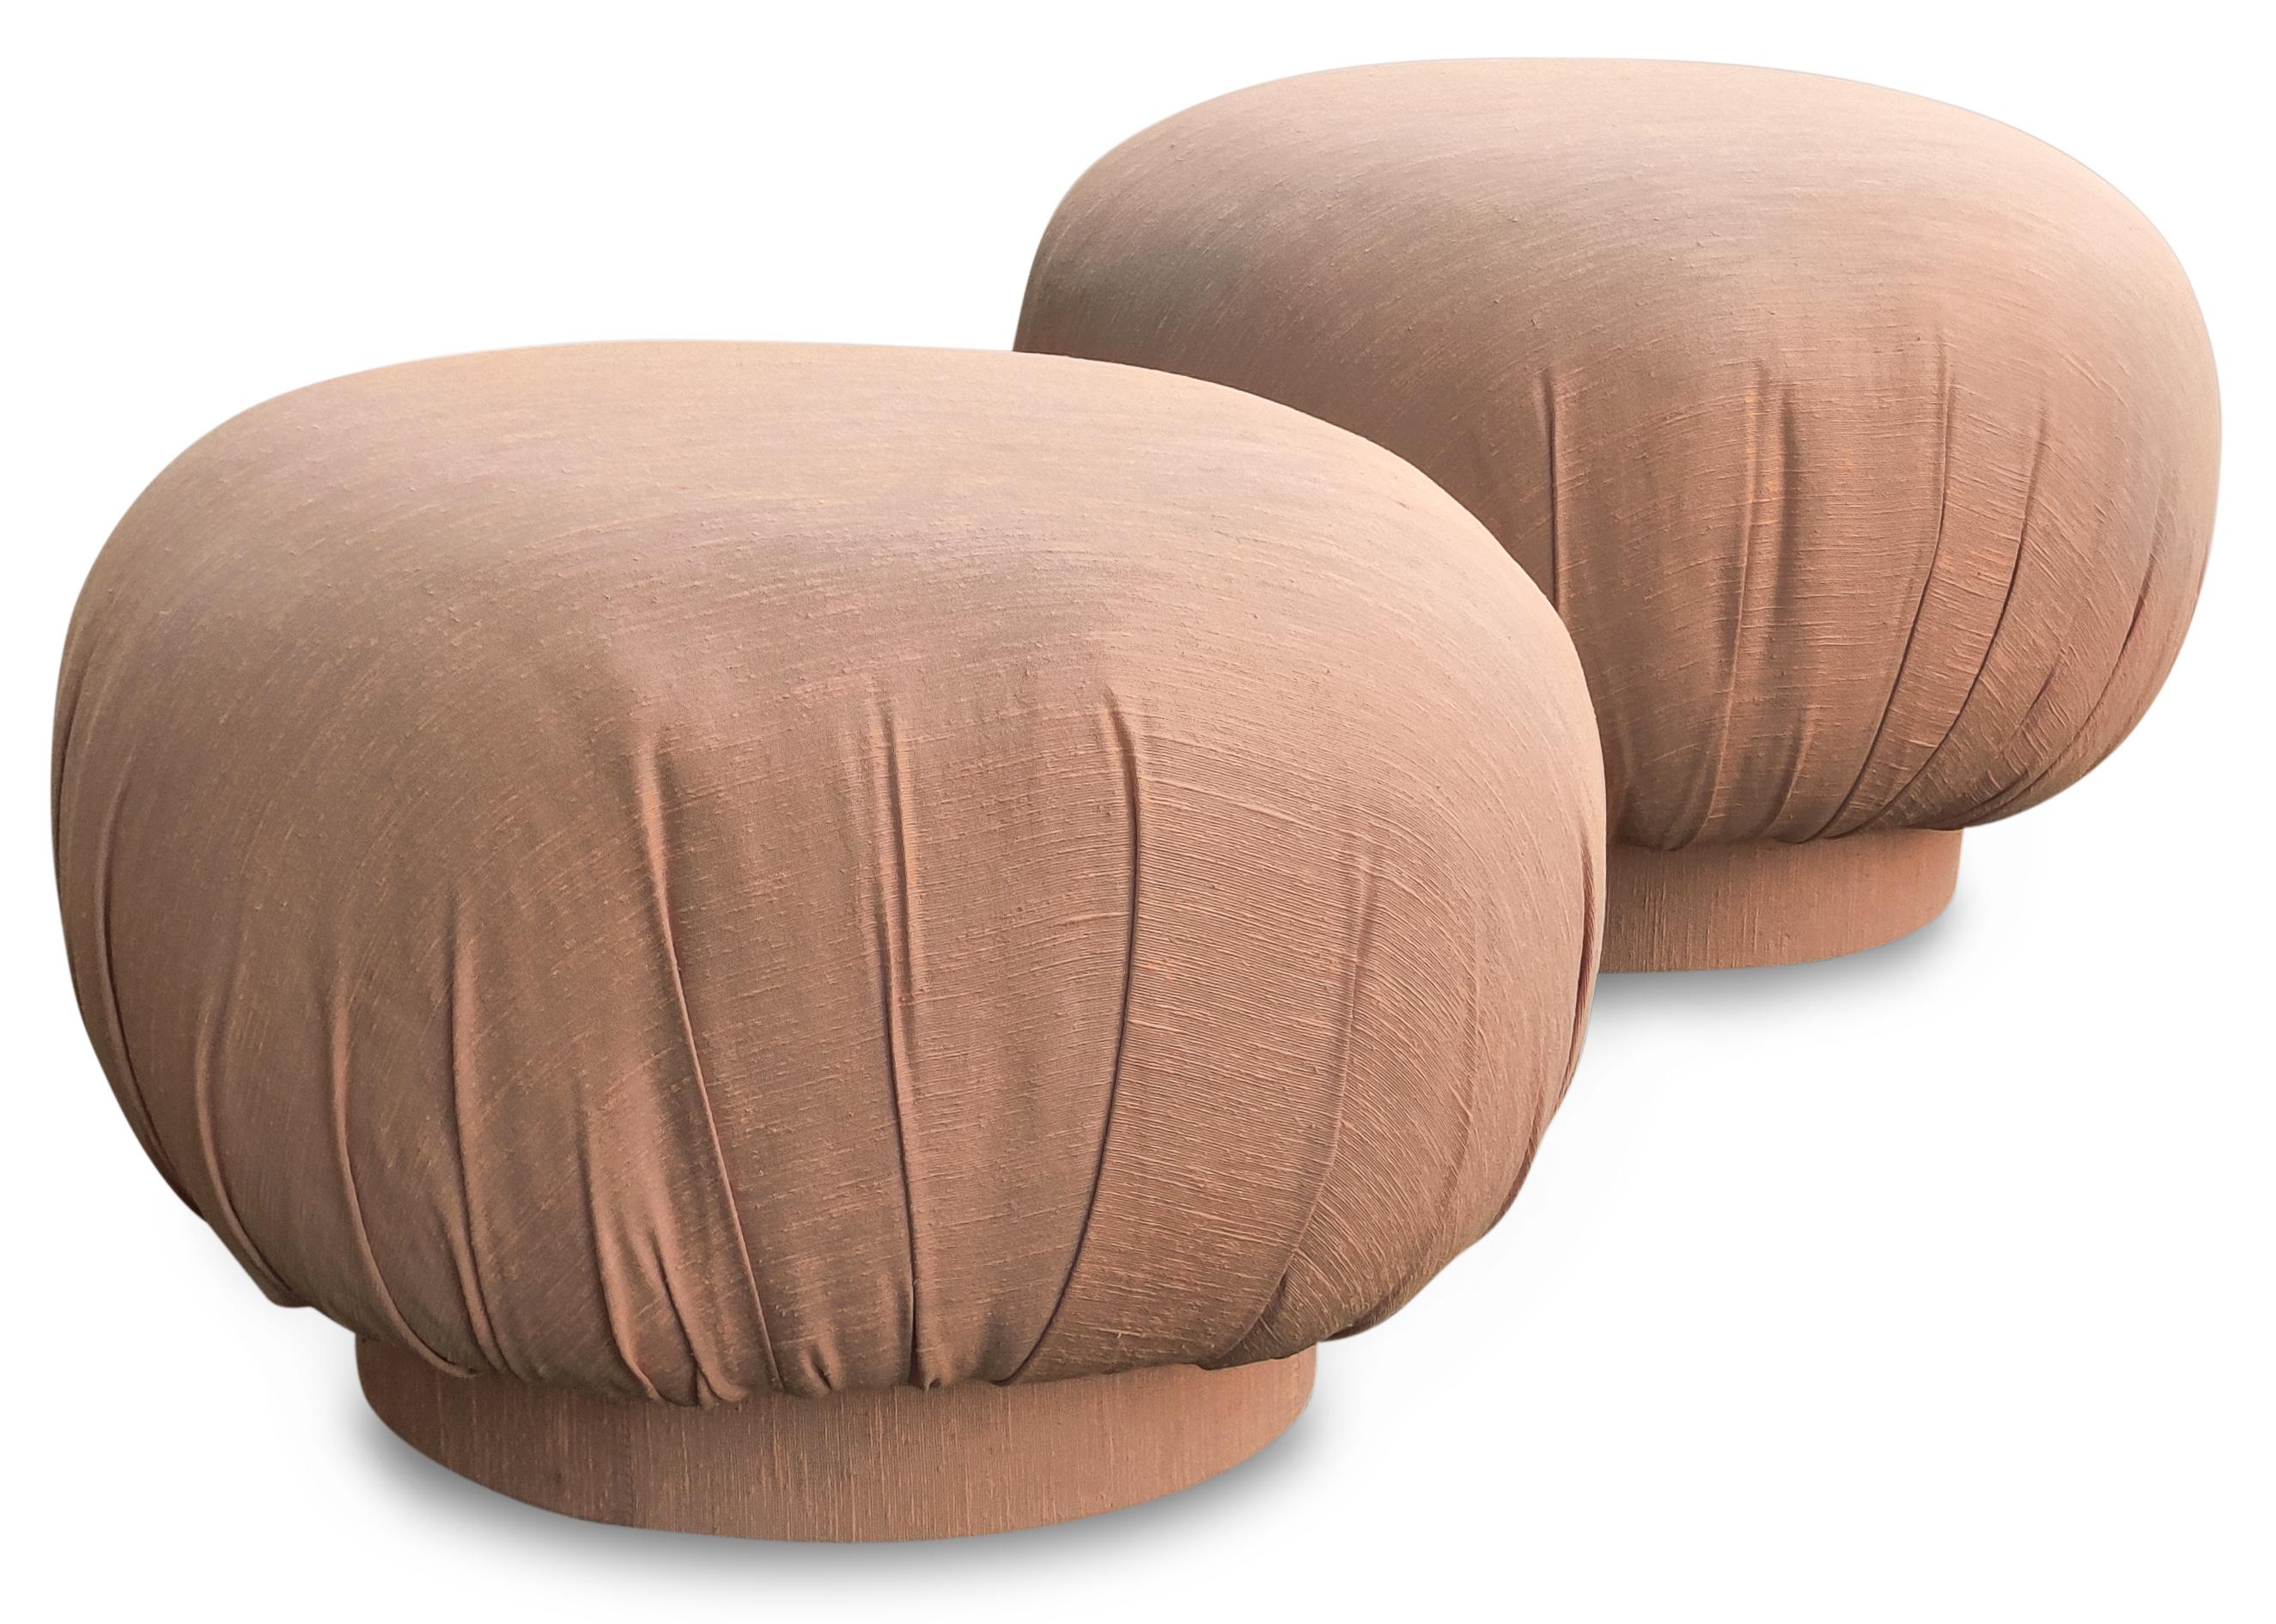 Upholstery Adrian Pearsall Pair Swivel Pouf Ottomans Benches Stools with Cloth Bases, 1980s For Sale